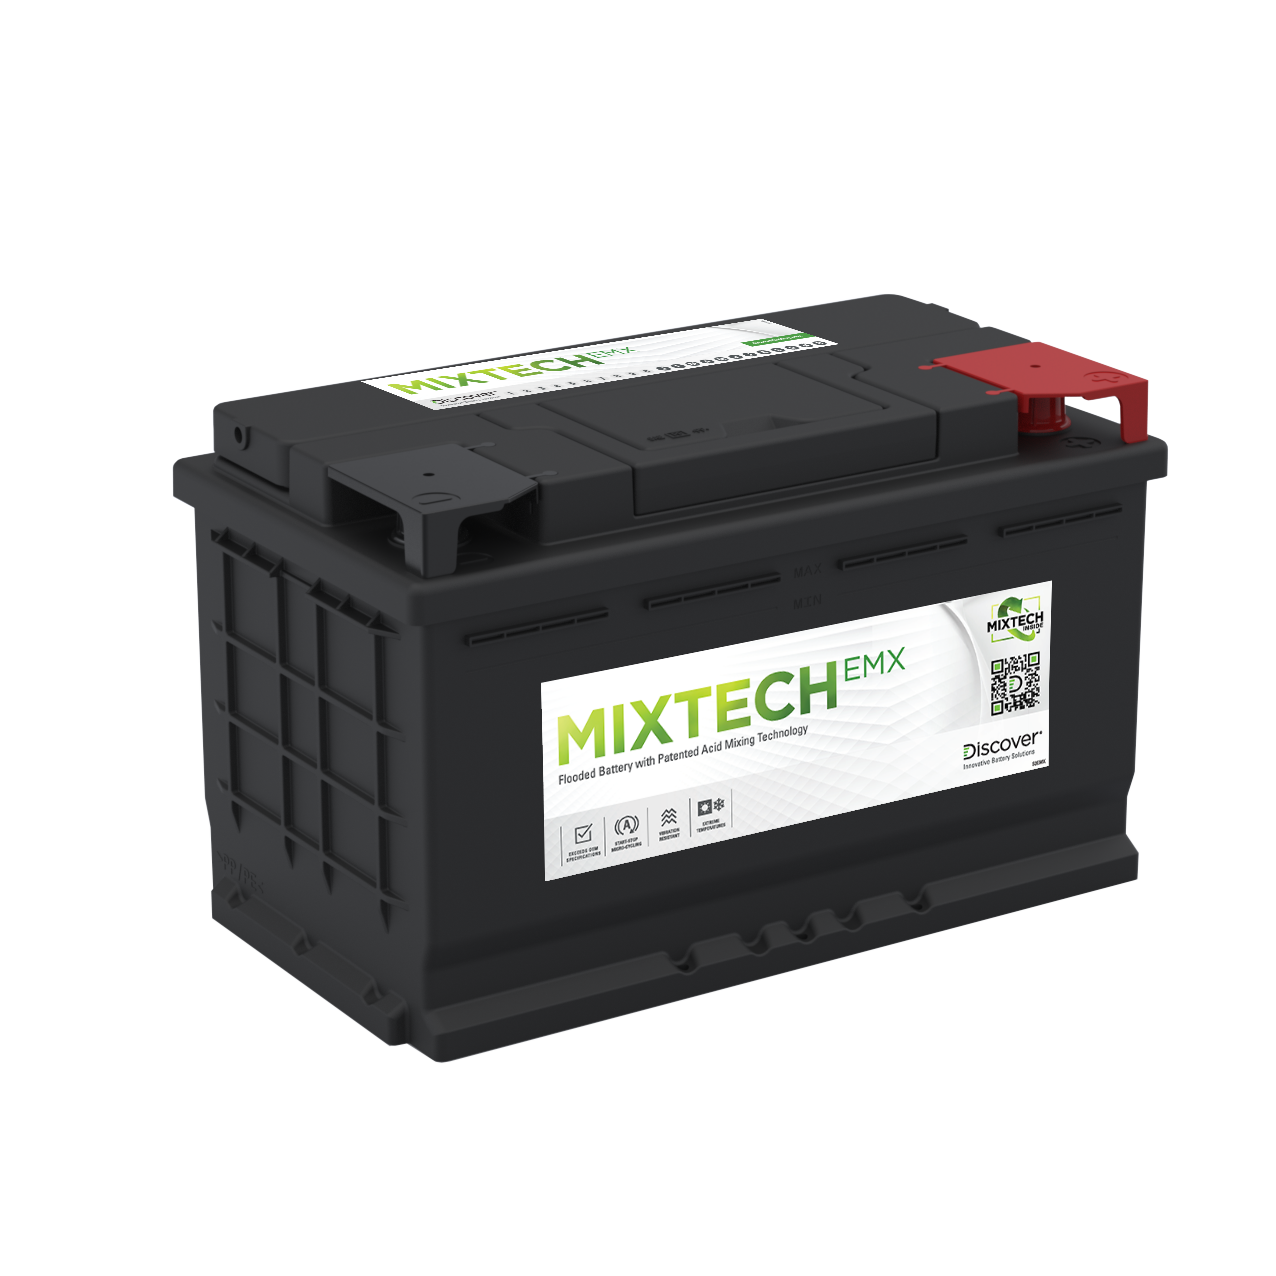 M594-EMX MIXTECH EMX Premium Flooded Starting Battery | Discover